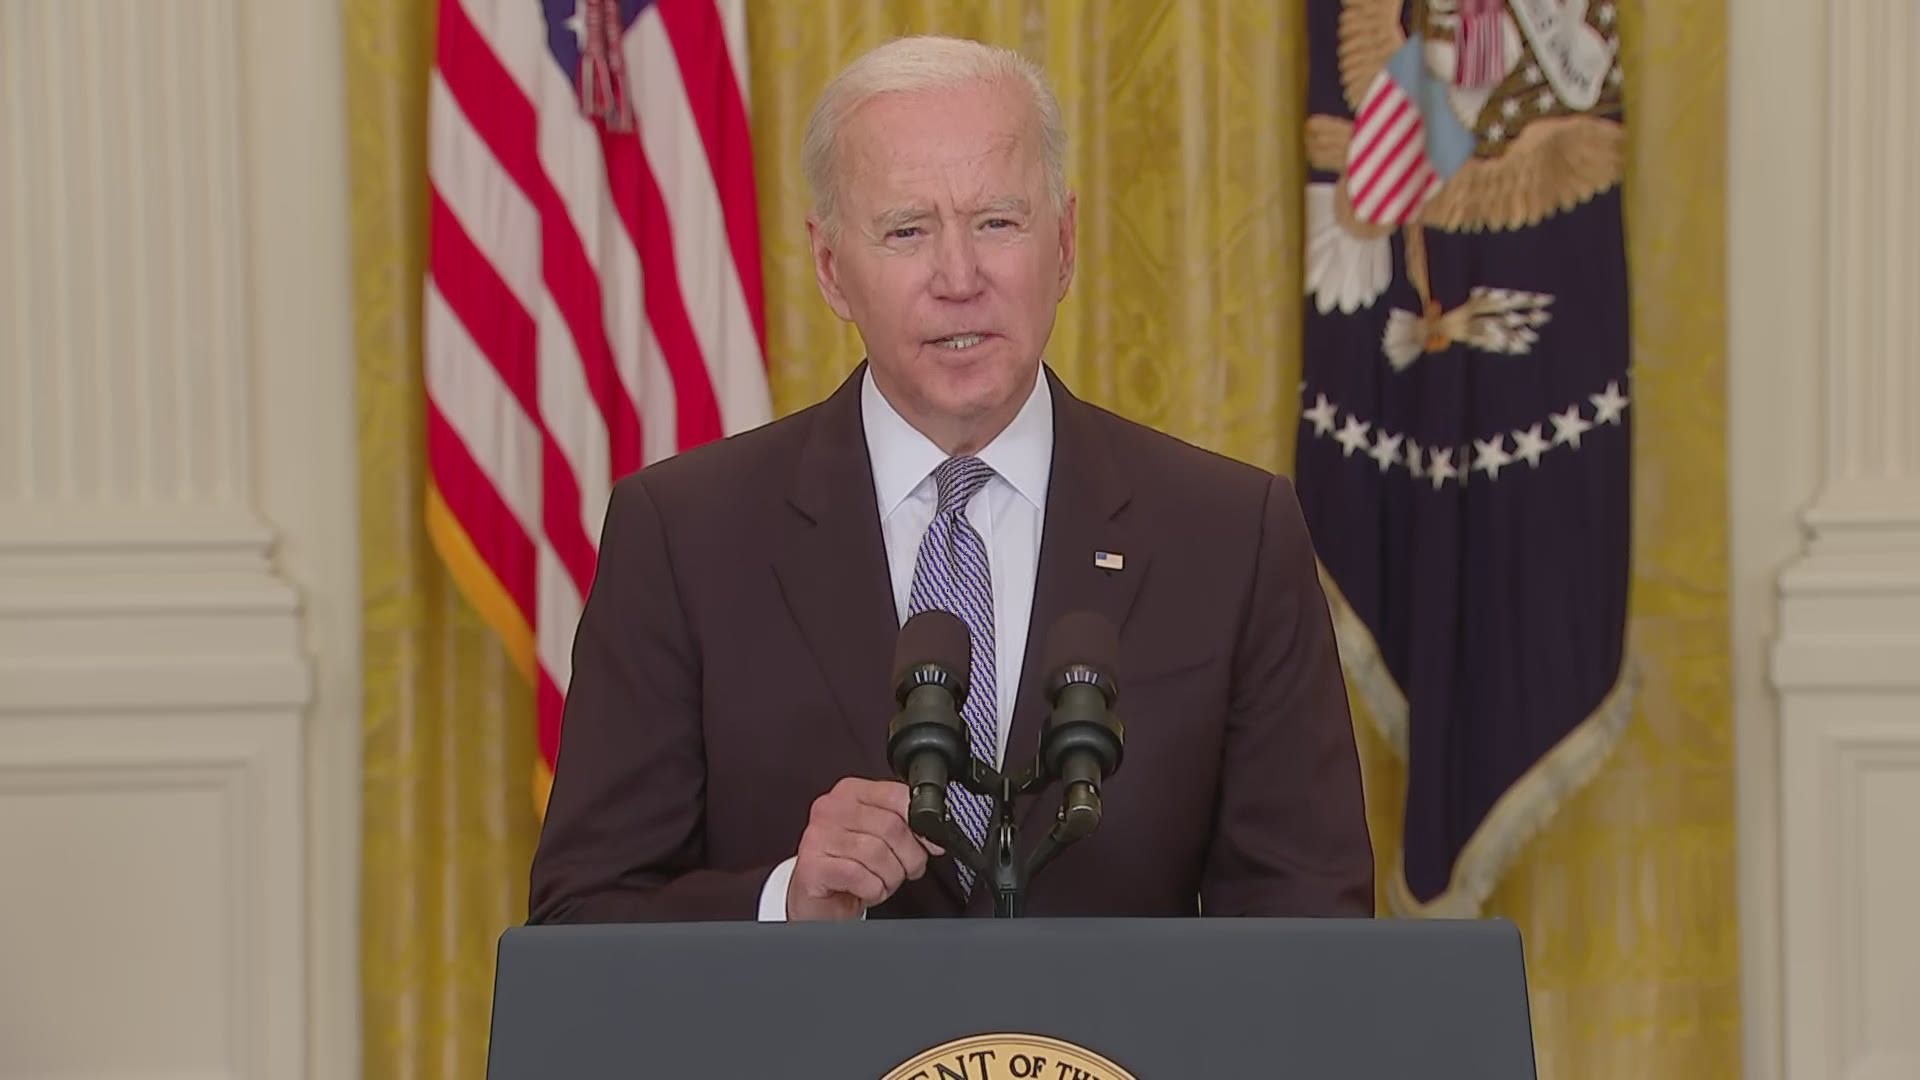 The Biden administration announced Monday that 39 million families are set to receive monthly child payments beginning on July 15.